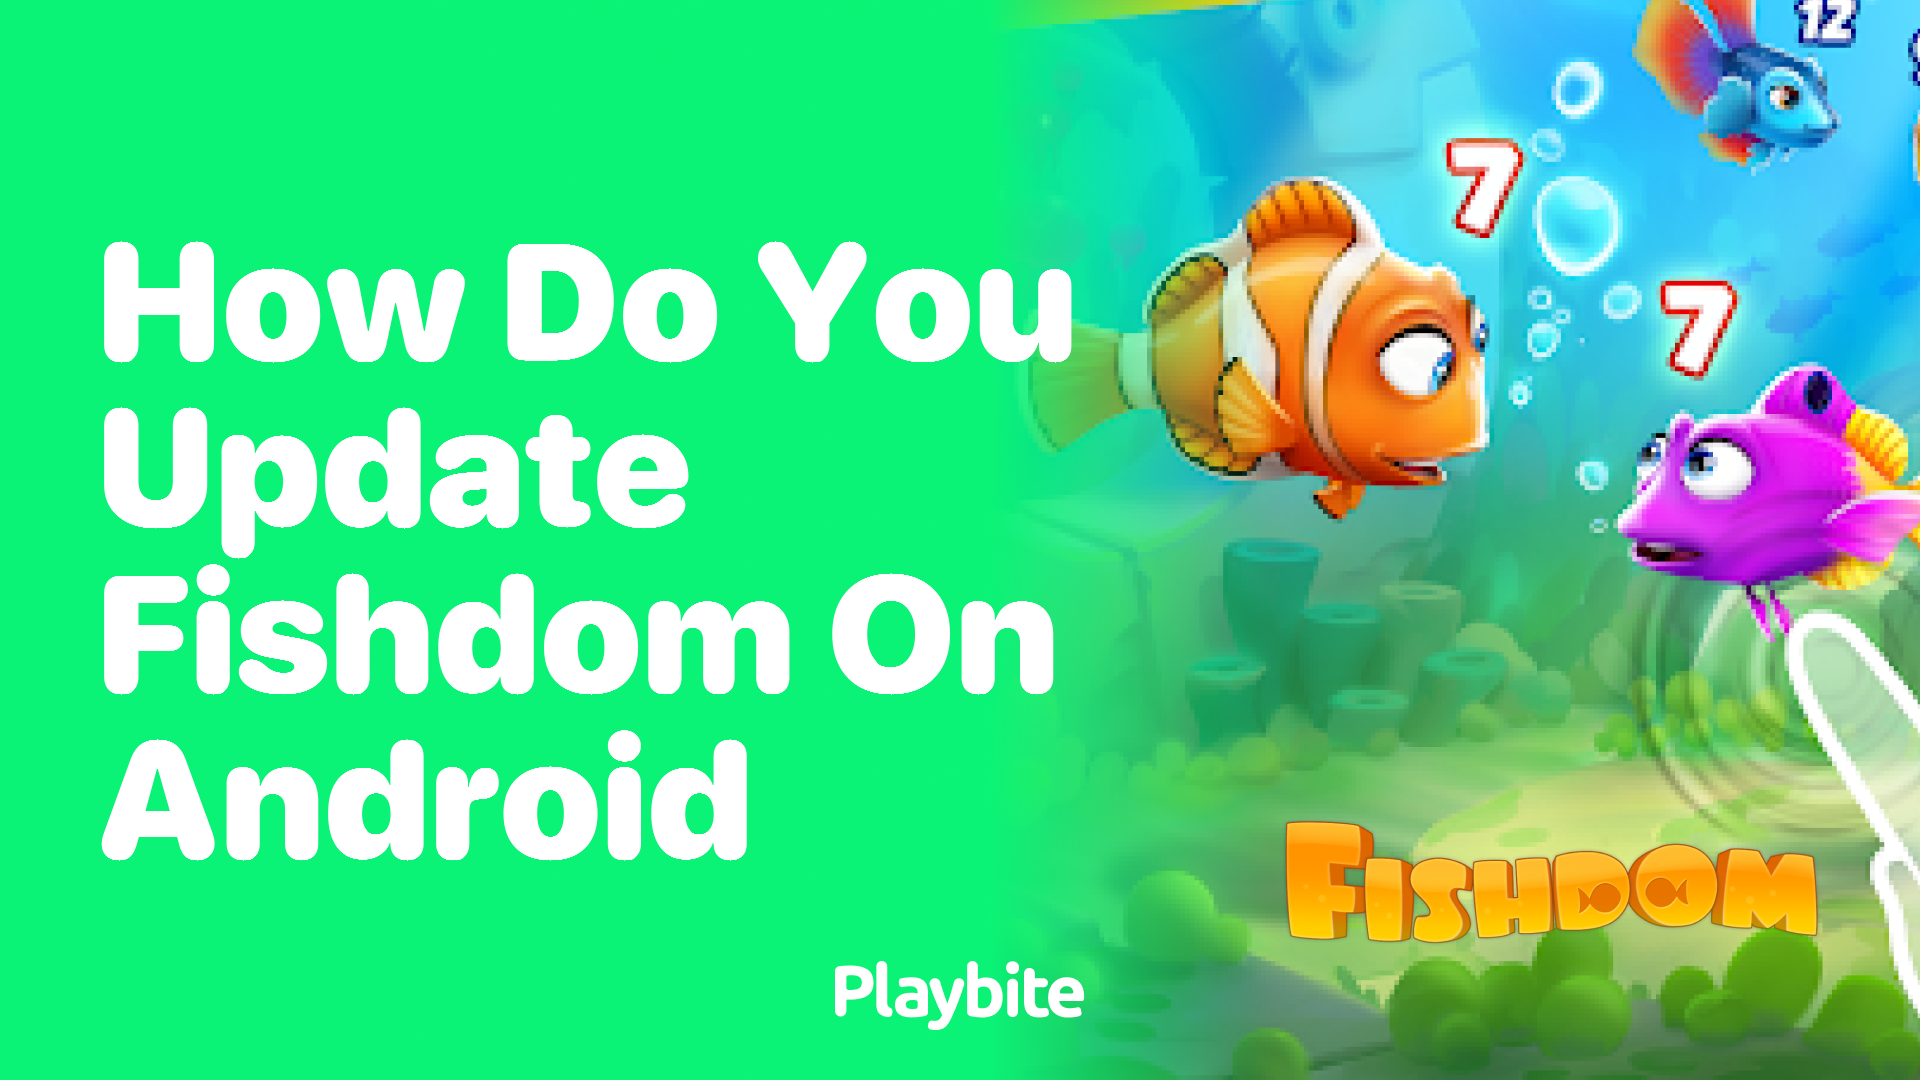 How Do You Update Fishdom on Android?